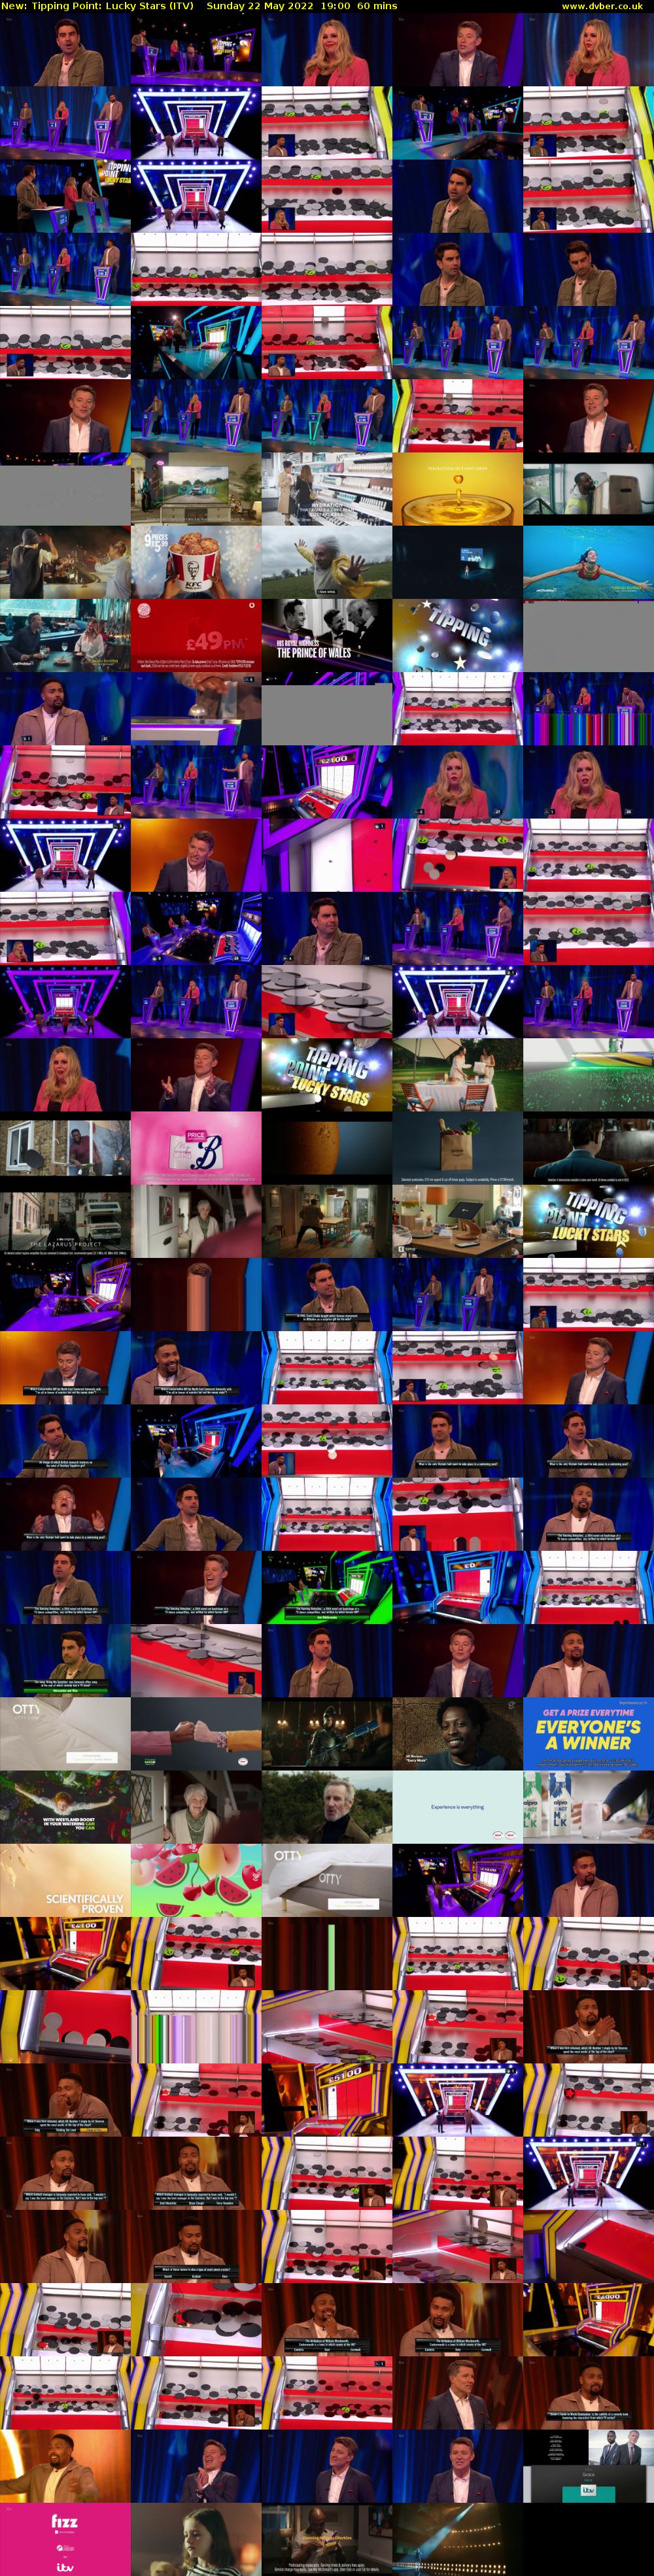 Tipping Point: Lucky Stars (ITV) Sunday 22 May 2022 19:00 - 20:00